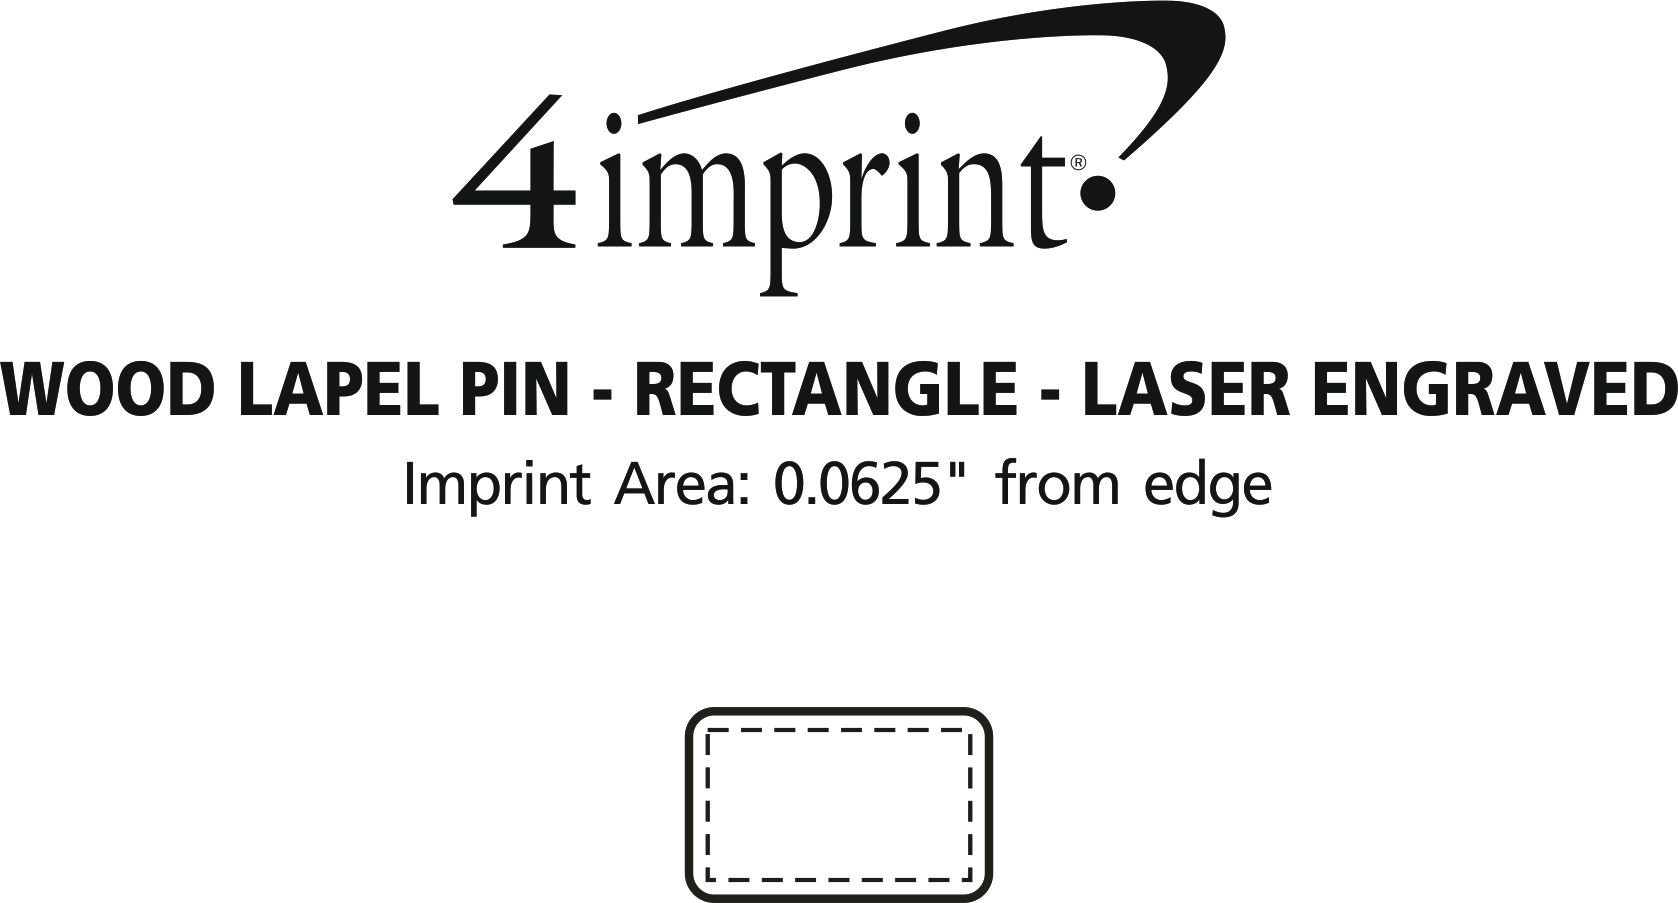 Imprint Area of Wood Lapel Pin - Rectangle - Laser Engraved